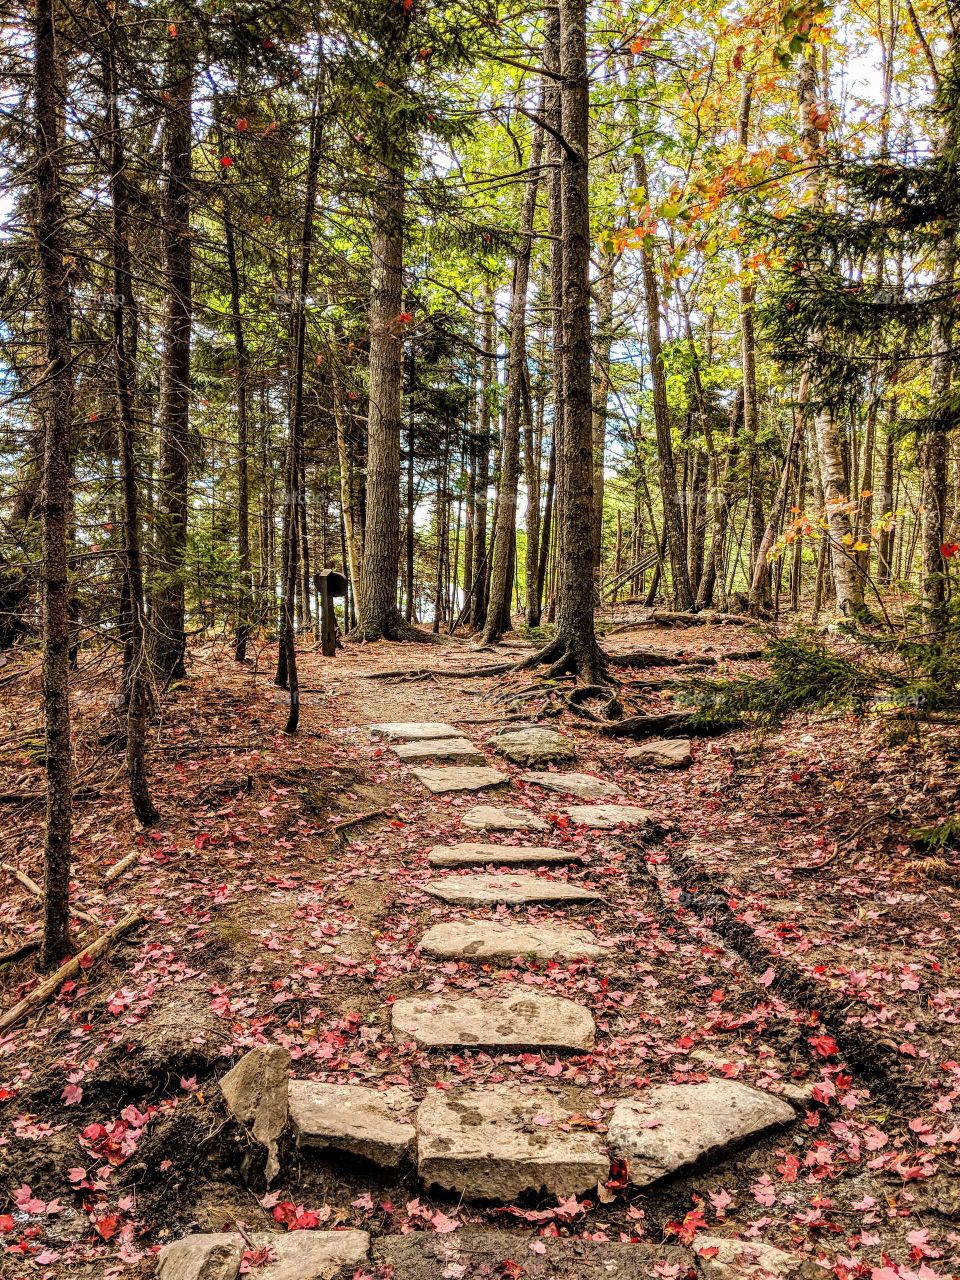 Stone path in the woods during fall